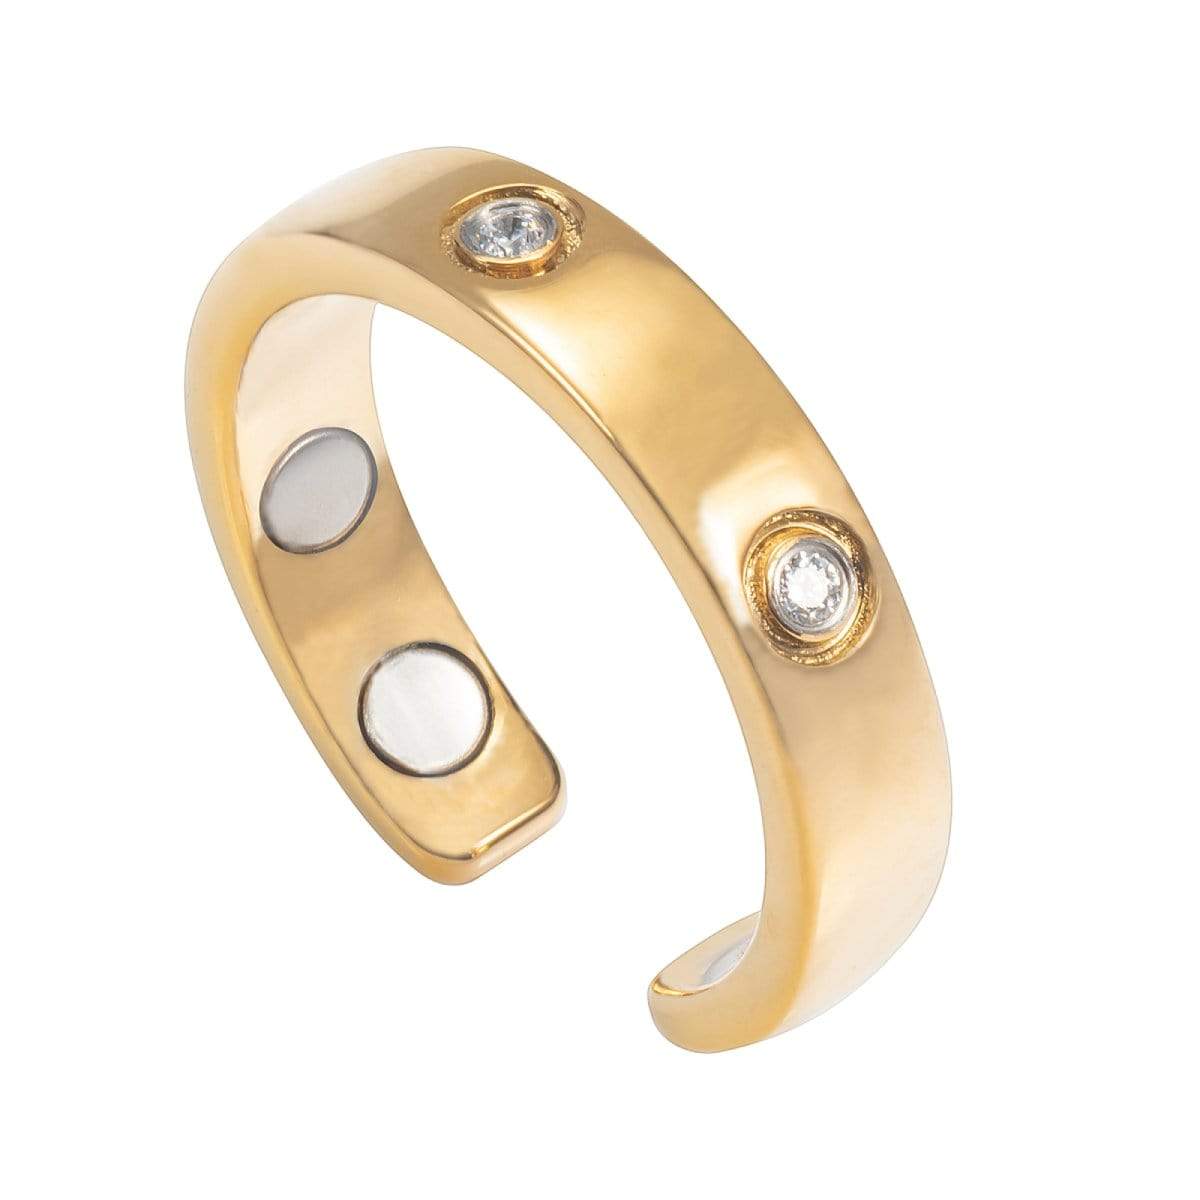 Crystal Magnetic Therapy Ring (Gold)